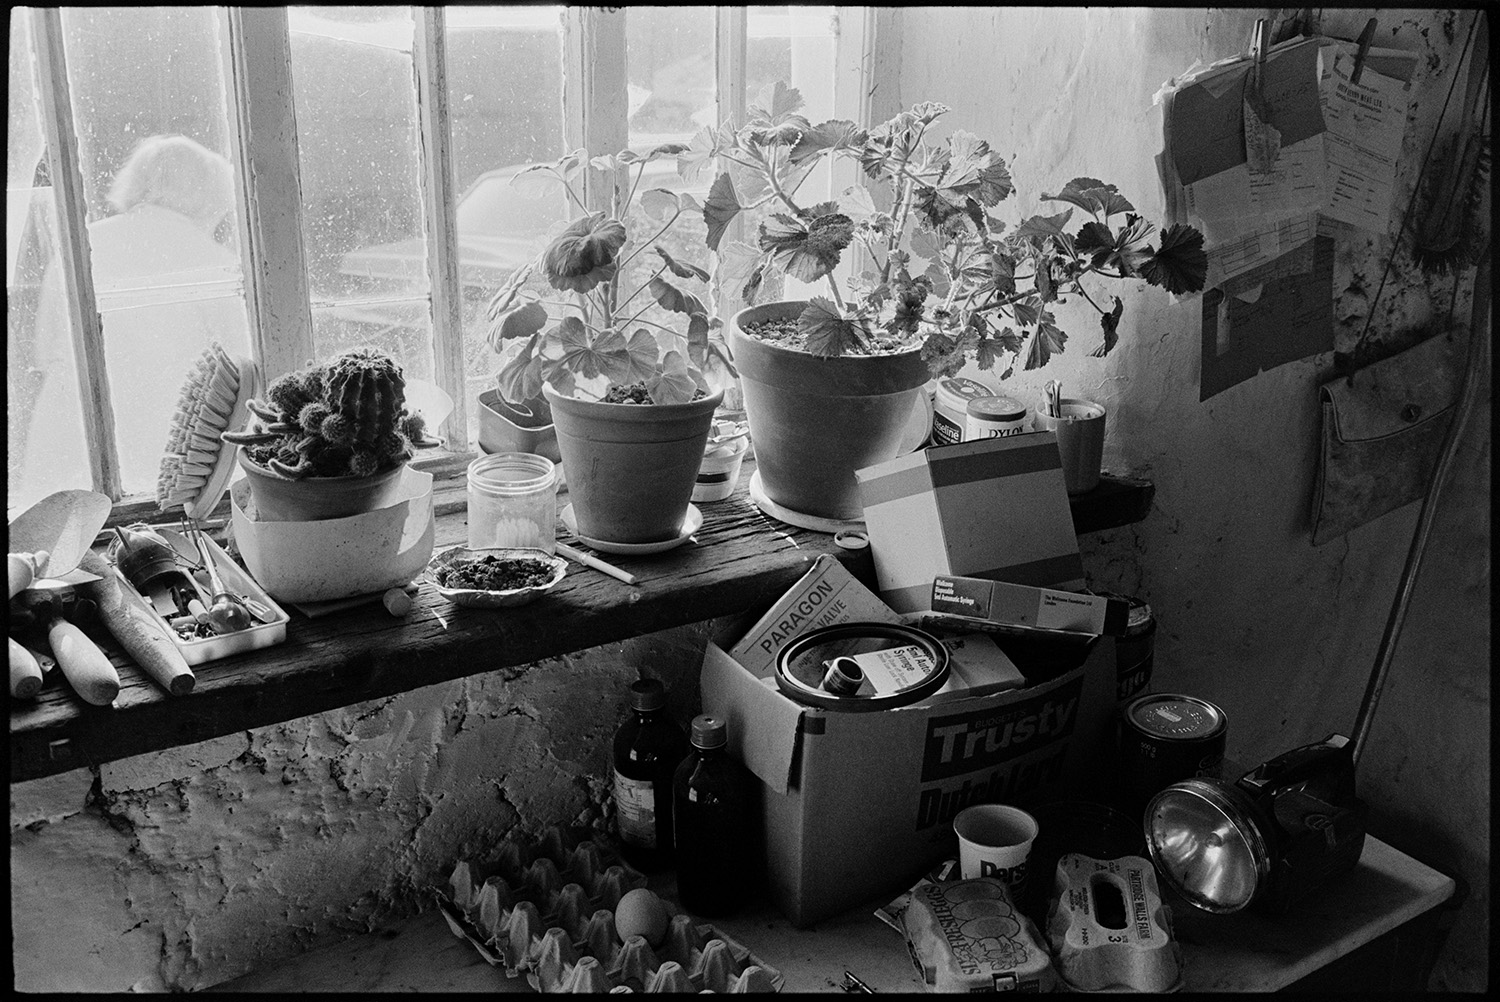 Farm windowsill, pot plants, eggs. 
[A windowsill in the farmhouse at Lower Langham, Dolton. Geraniums, cacti and brushes can be seen, as well as egg boxes, an egg, cardboard boxes and a torch on a table below the windowsill.]